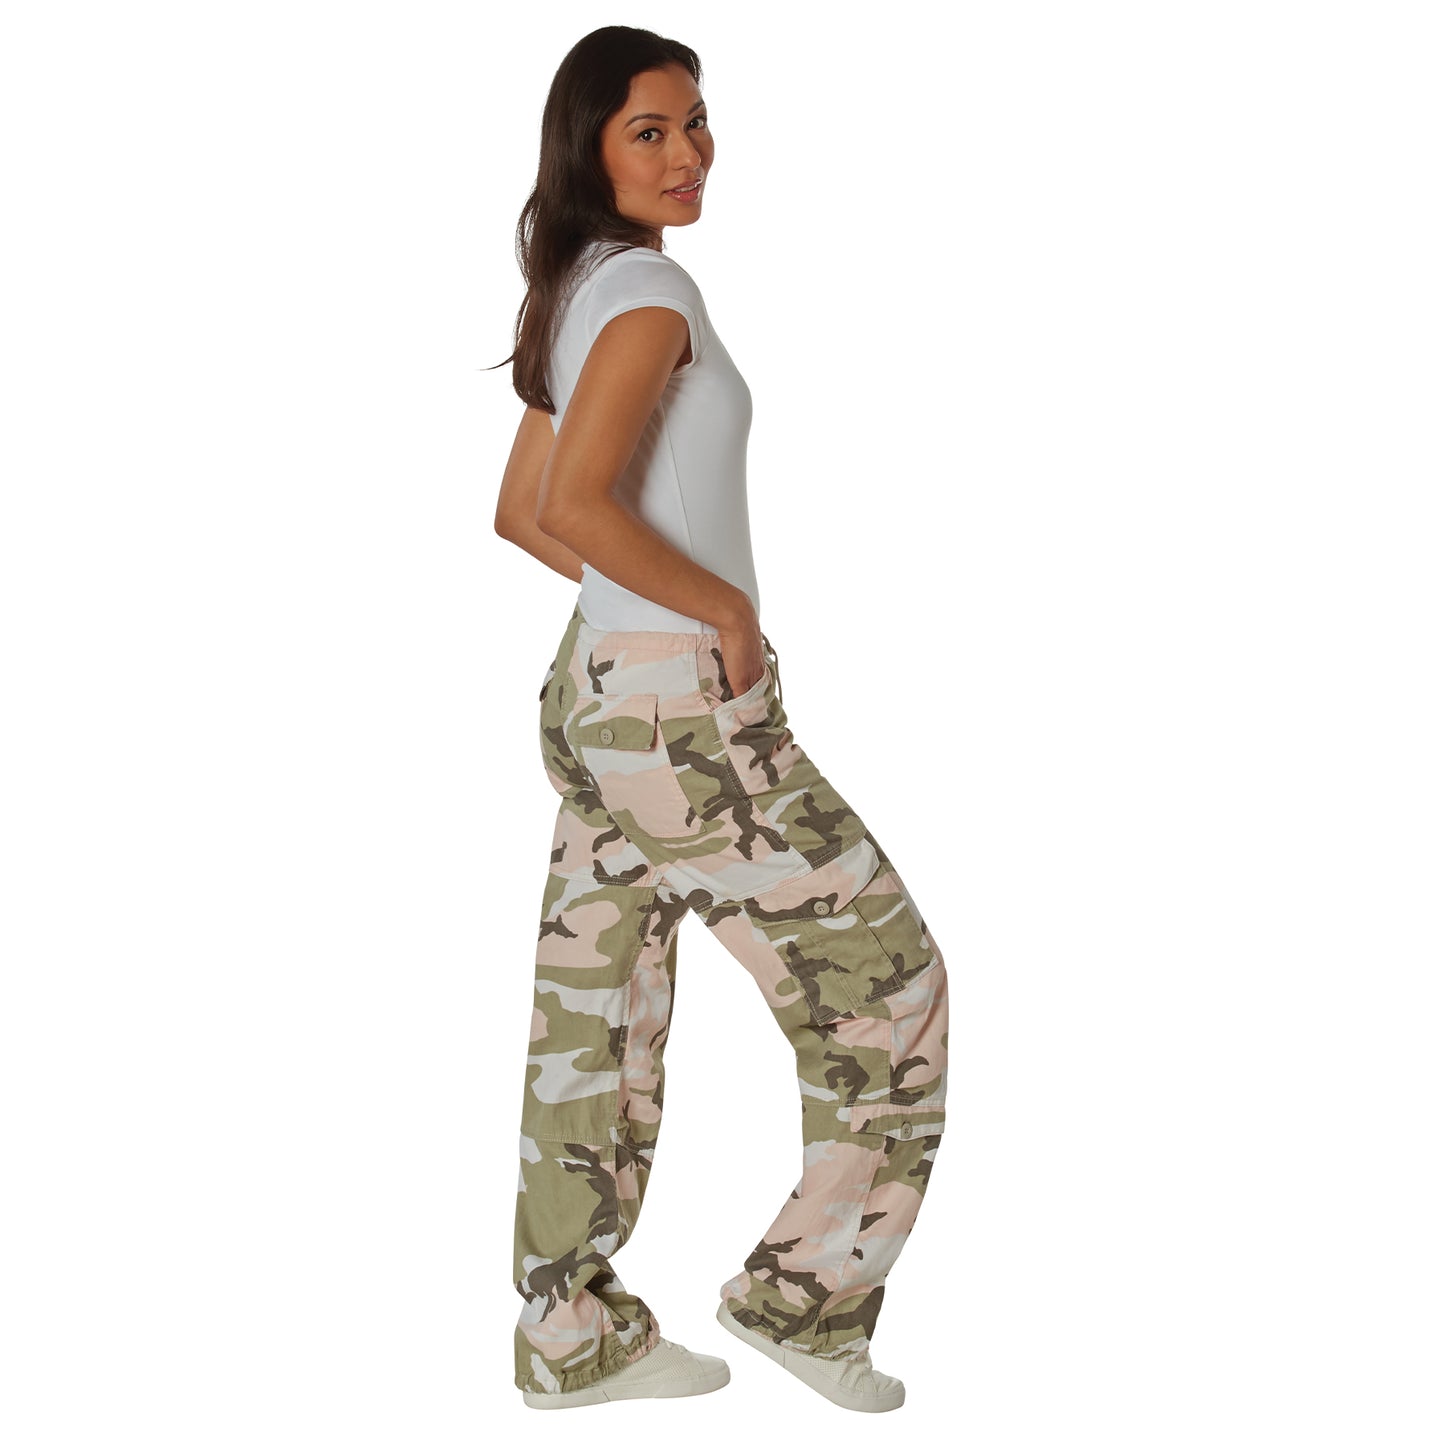 Rothco Women's Camo Vintage Paratrooper Fatigue Pants - Subdued Pink Camo